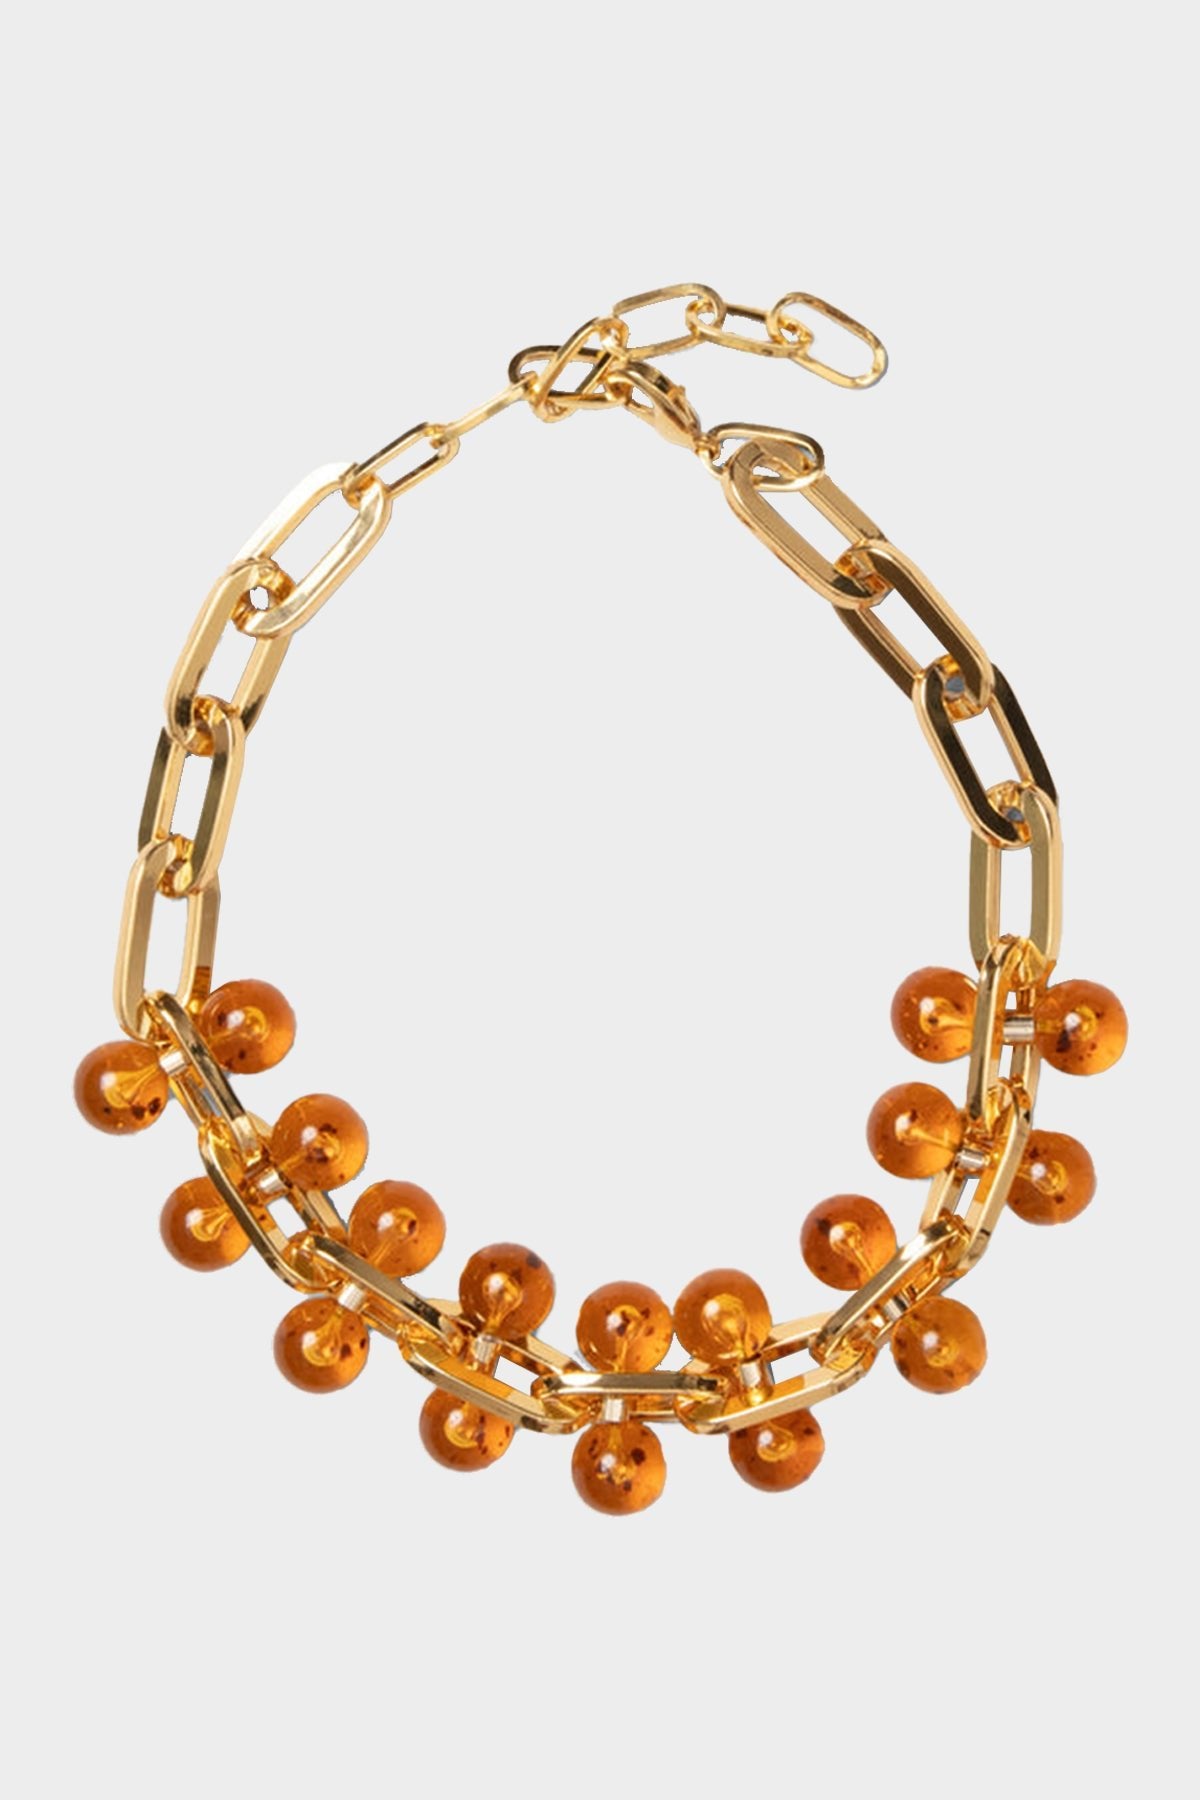 Inti Necklace in Amber - shop-olivia.com